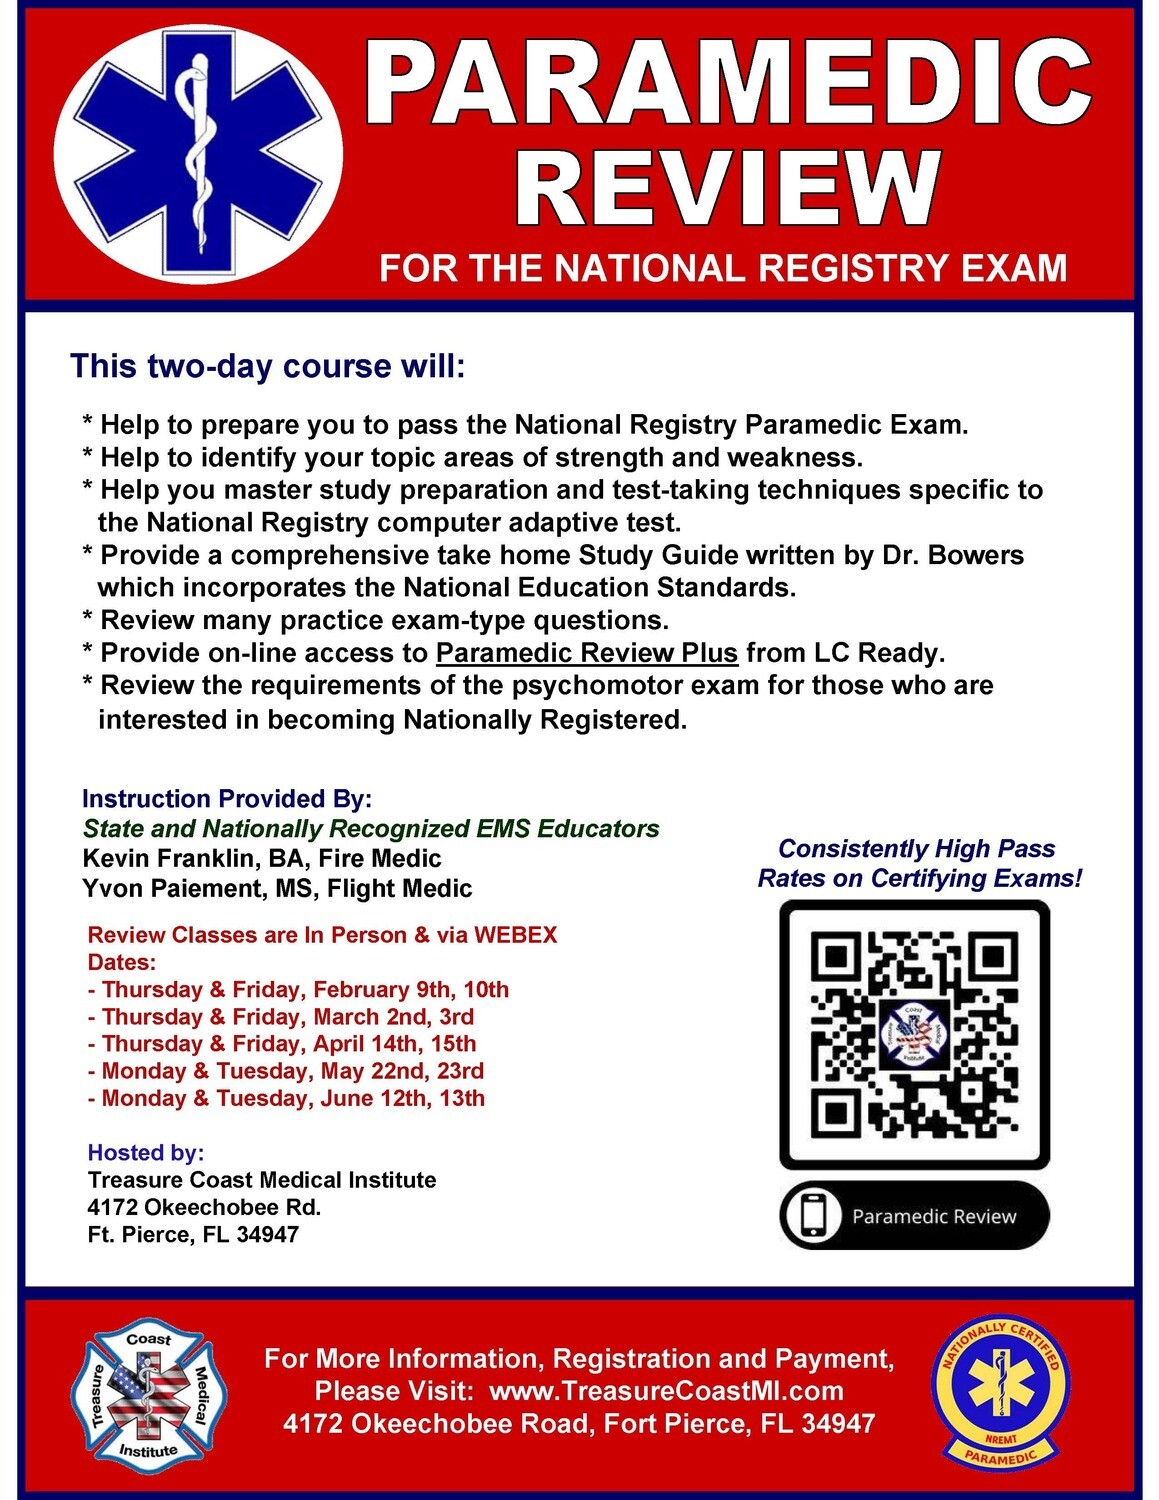 NREMT Paramedic March 2nd and 3rd (VIRTUAL VIA WEBEX 9-5pm)